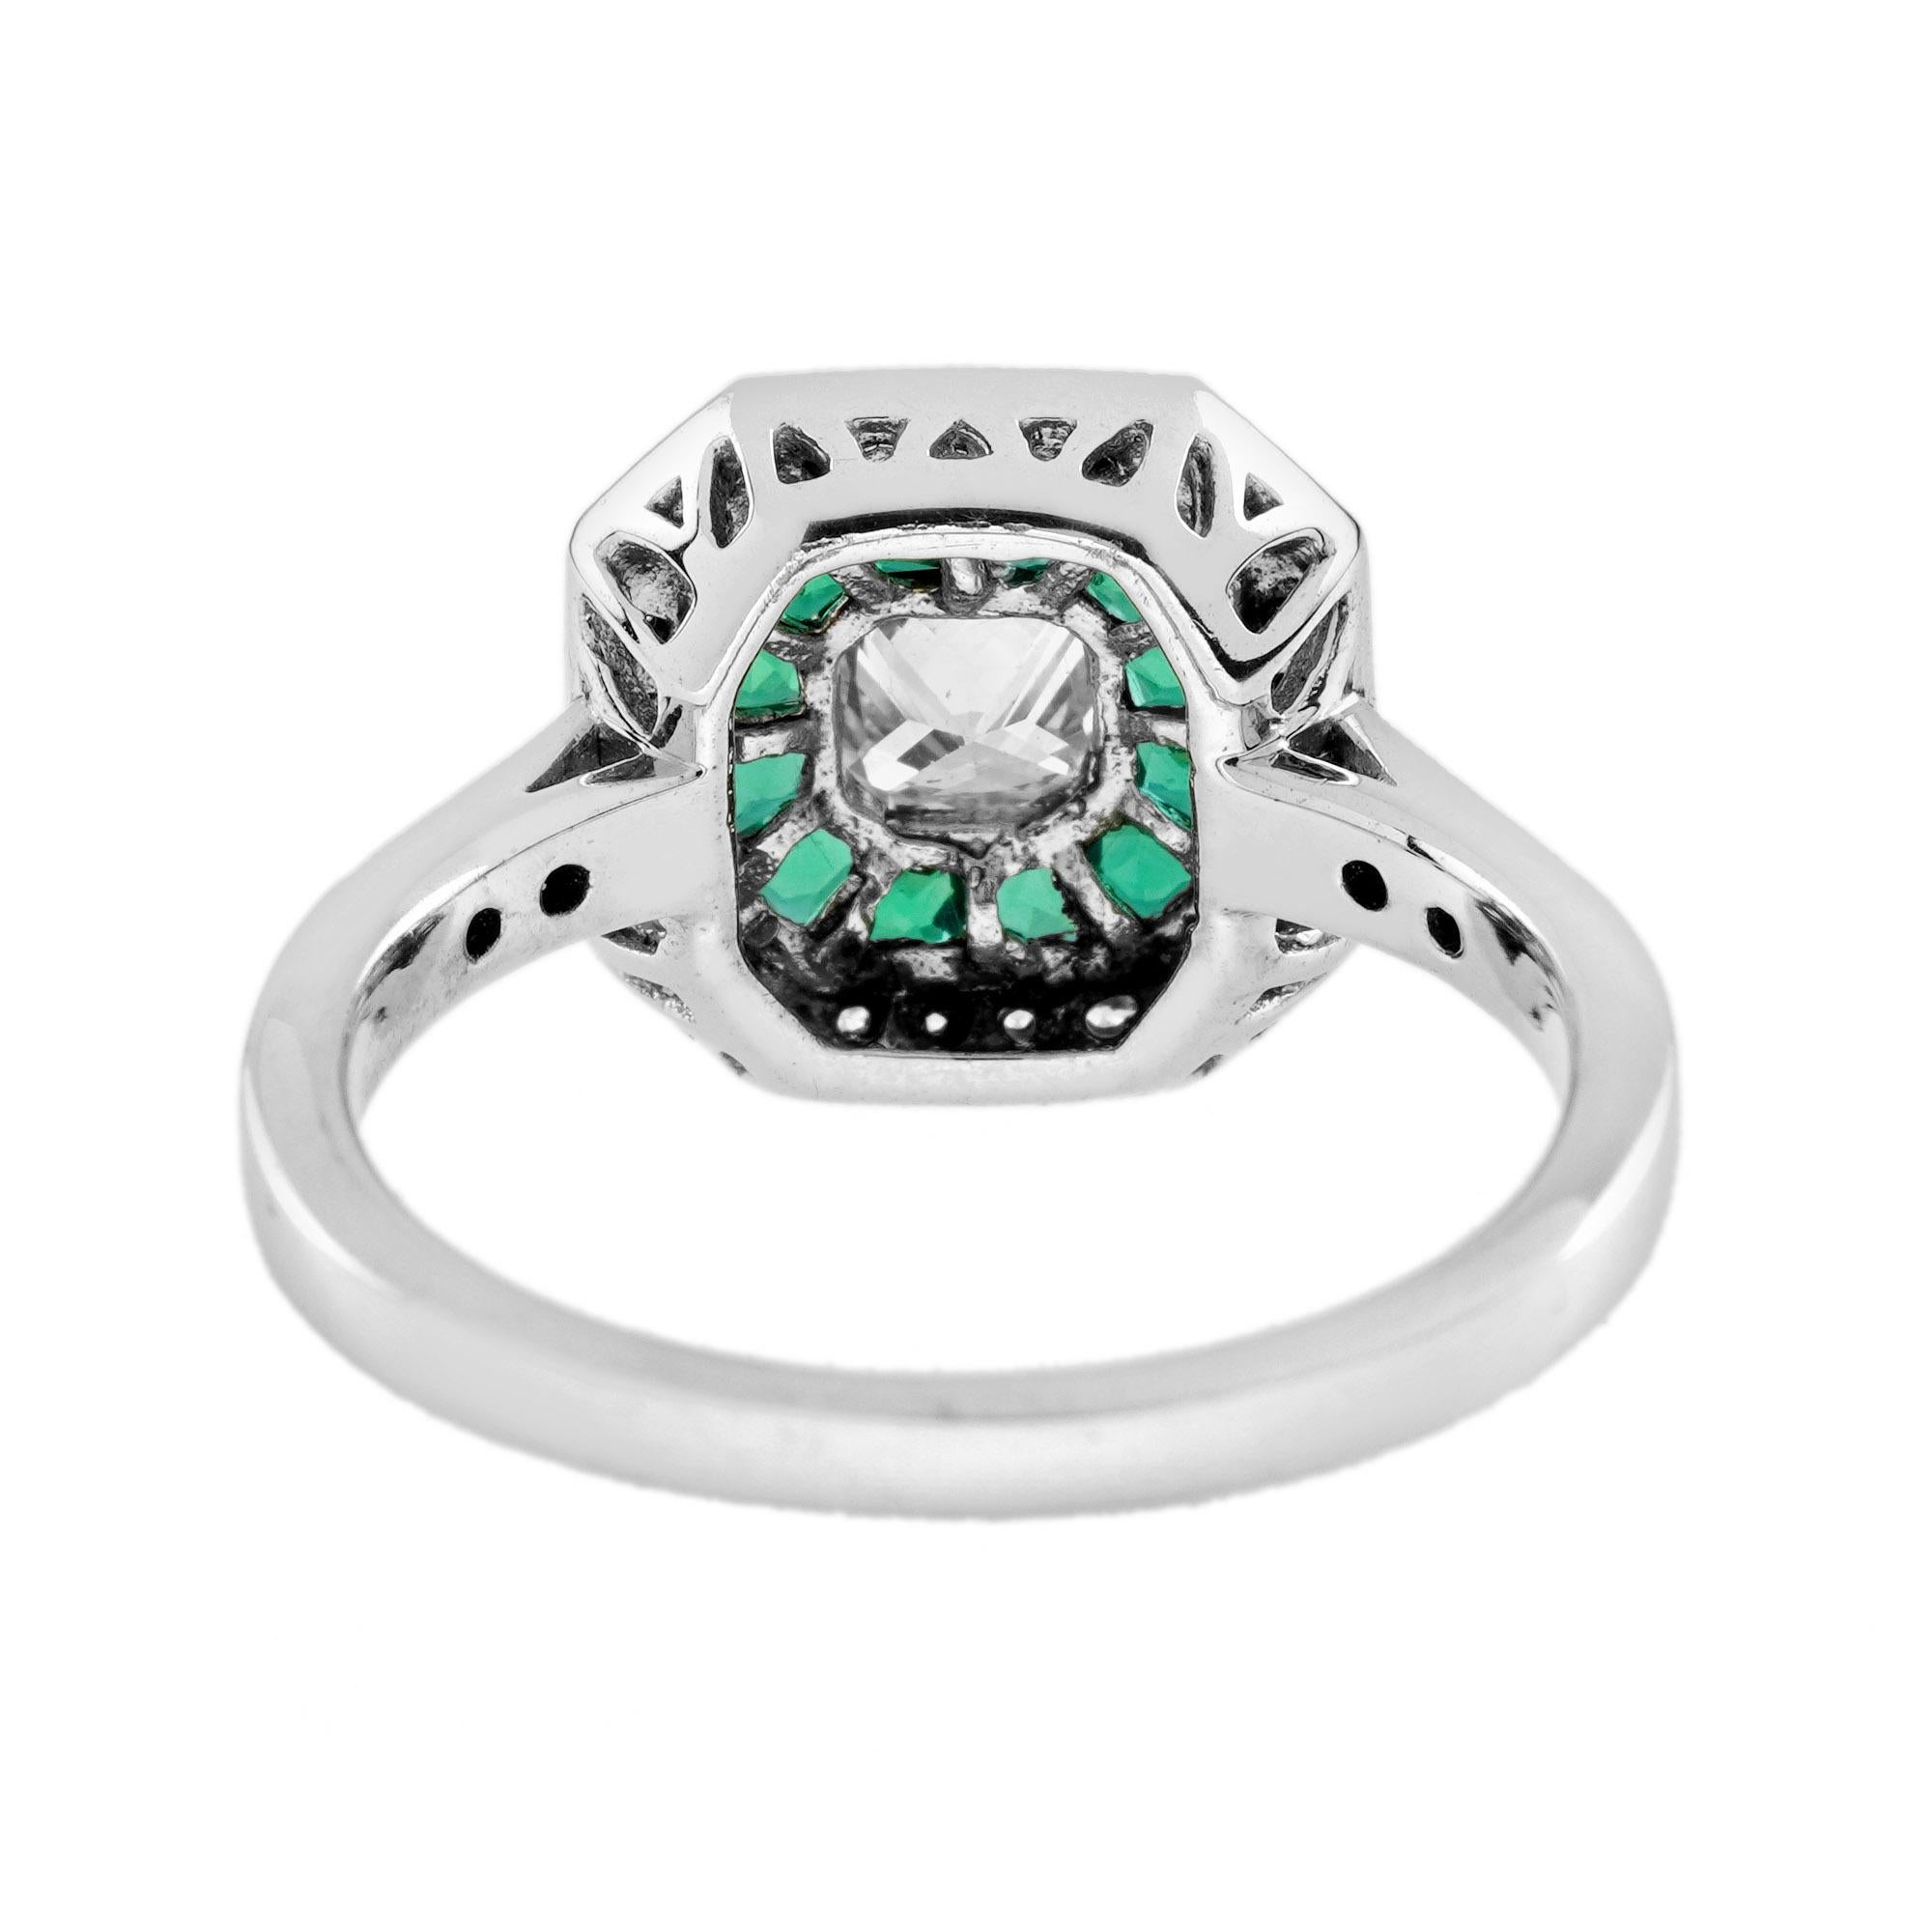 For Sale:  Diamond and Emerald Double Halo Art Deco Style Engagement Ring in 18K White Gold 5